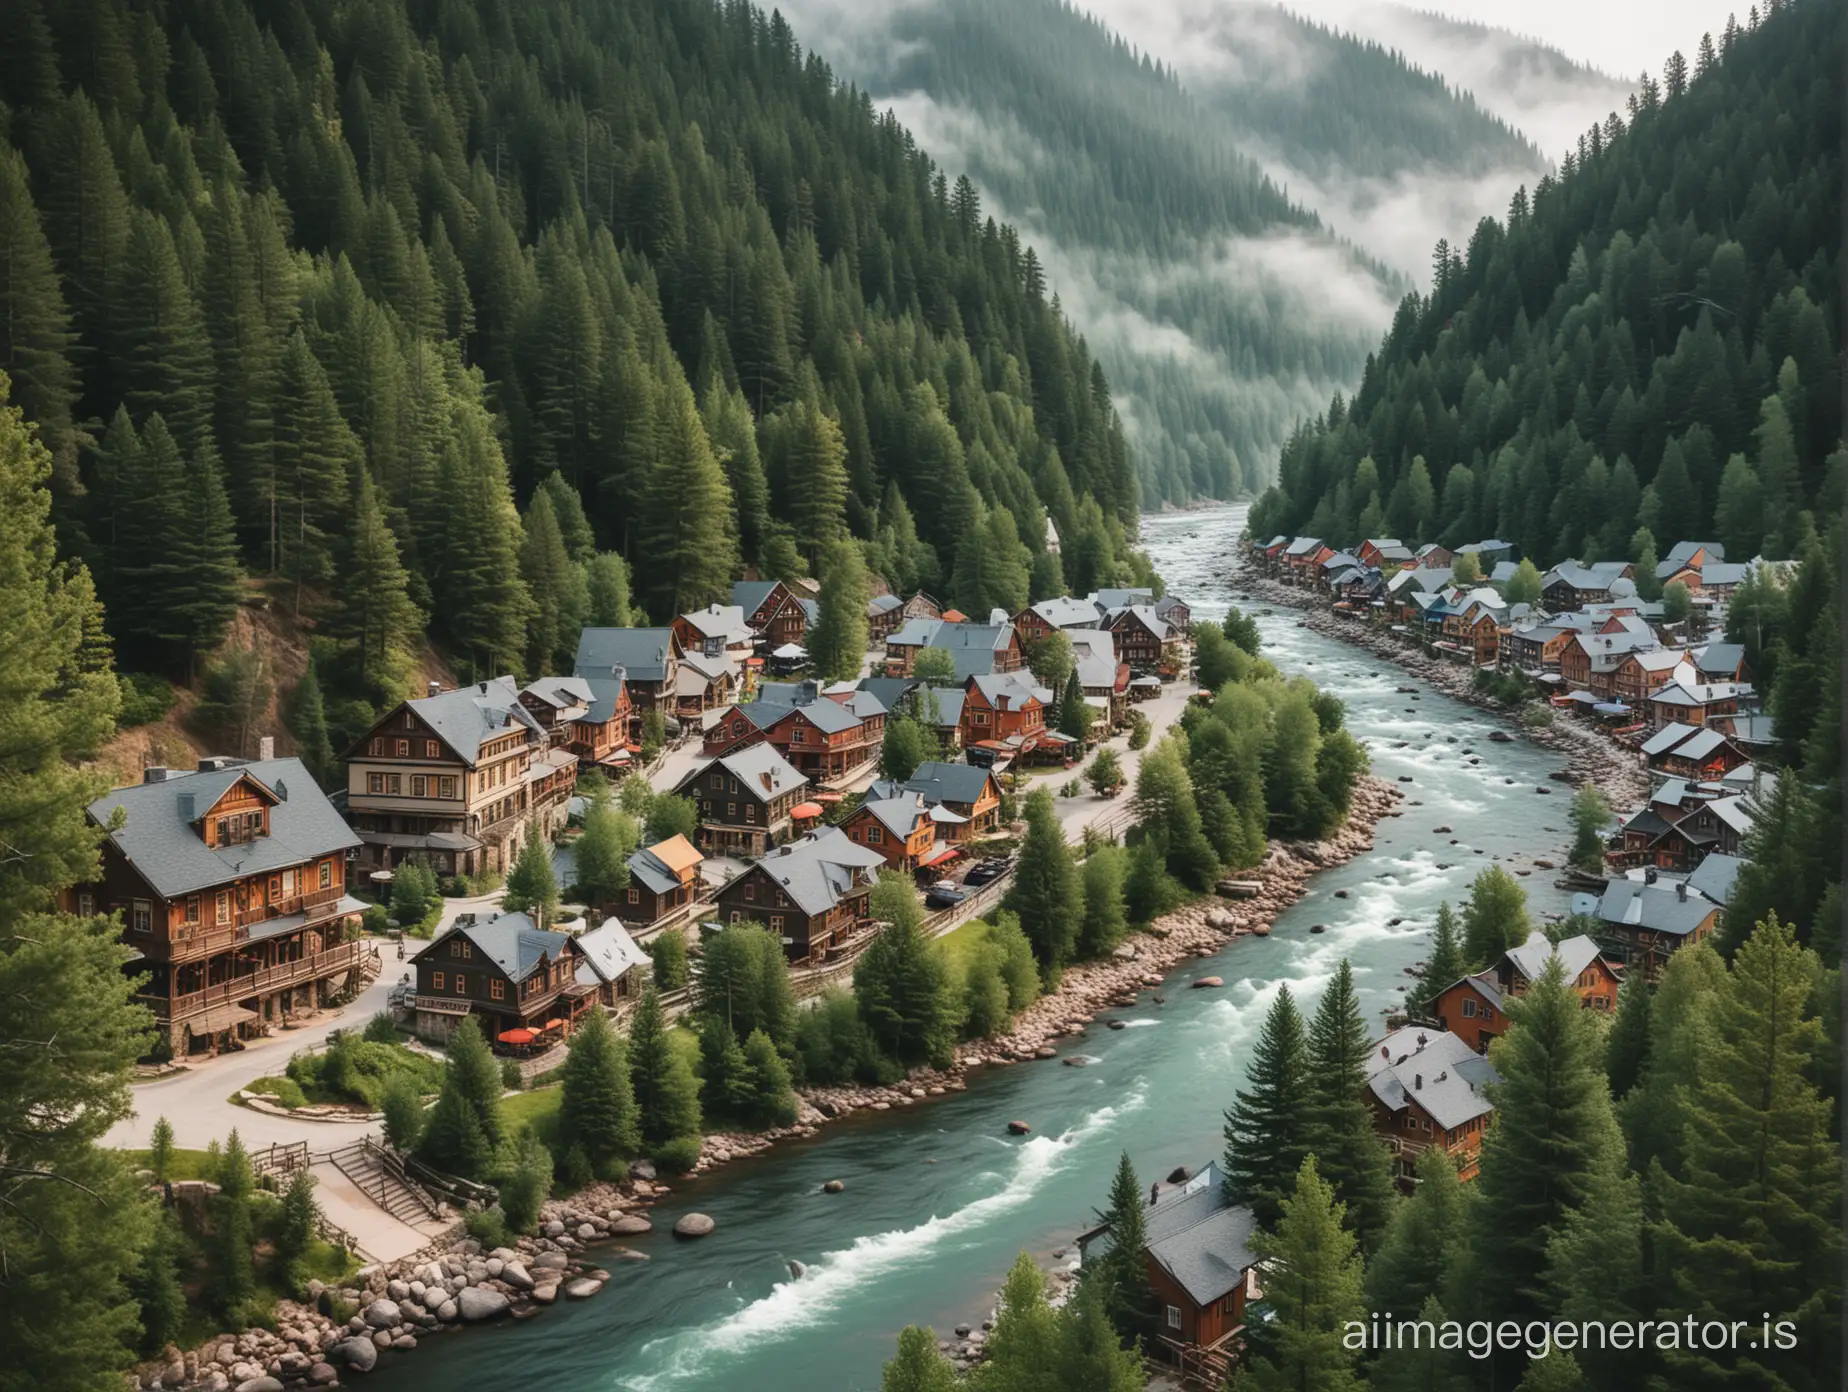 Charming-Cozy-Town-with-Lush-Greenery-and-Serene-River-Ambiance